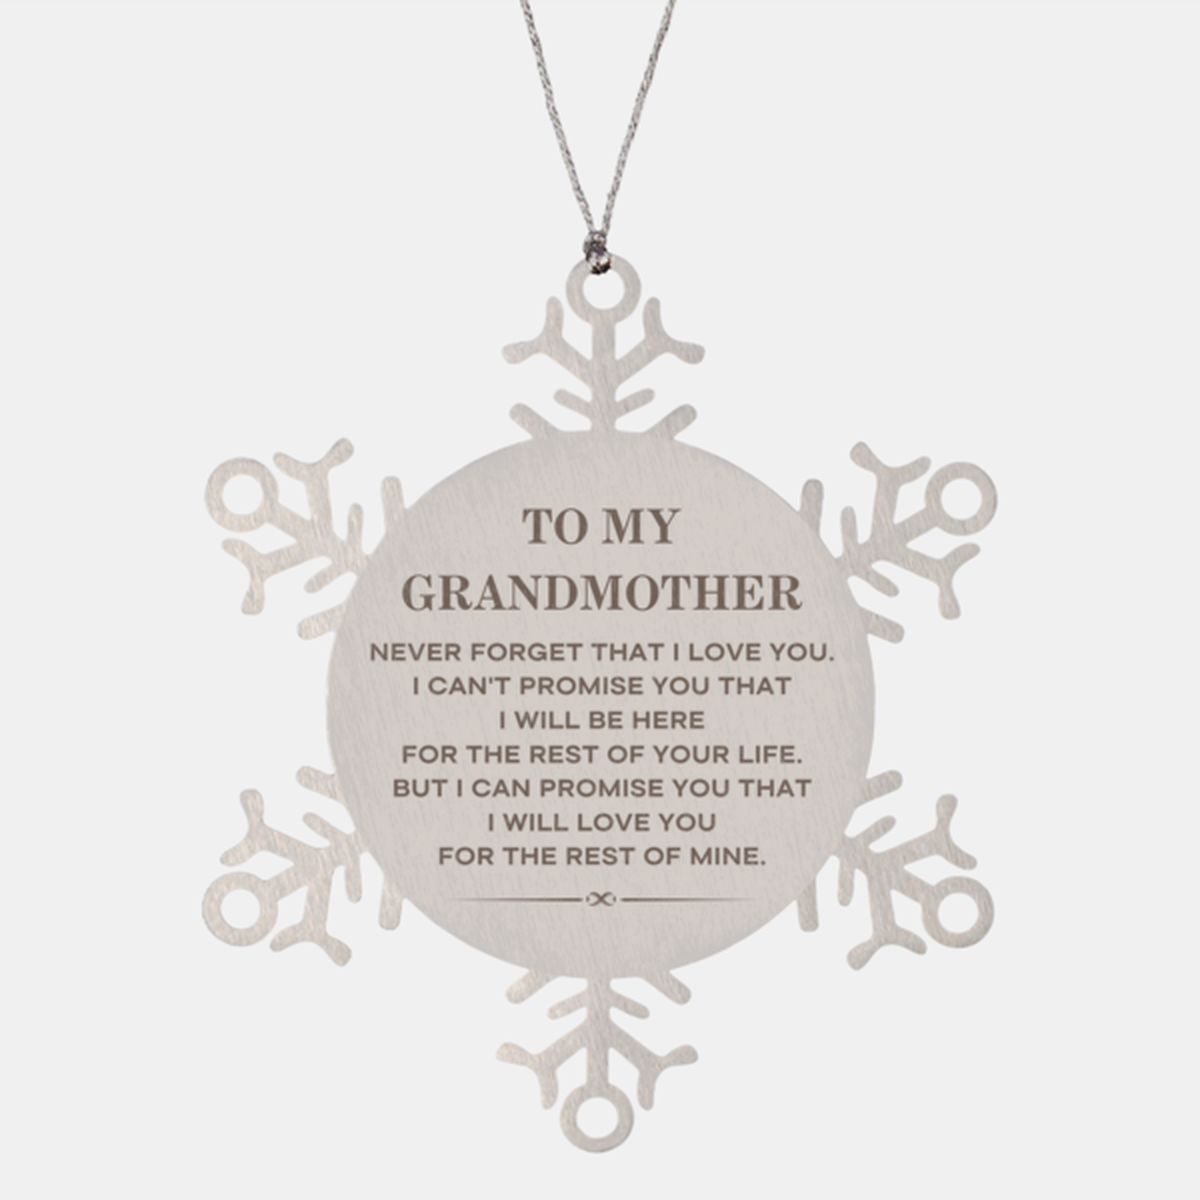 To My Grandmother Gifts, I will love you for the rest of mine, Love Grandmother Ornament, Birthday Christmas Unique Snowflake Ornament For Grandmother